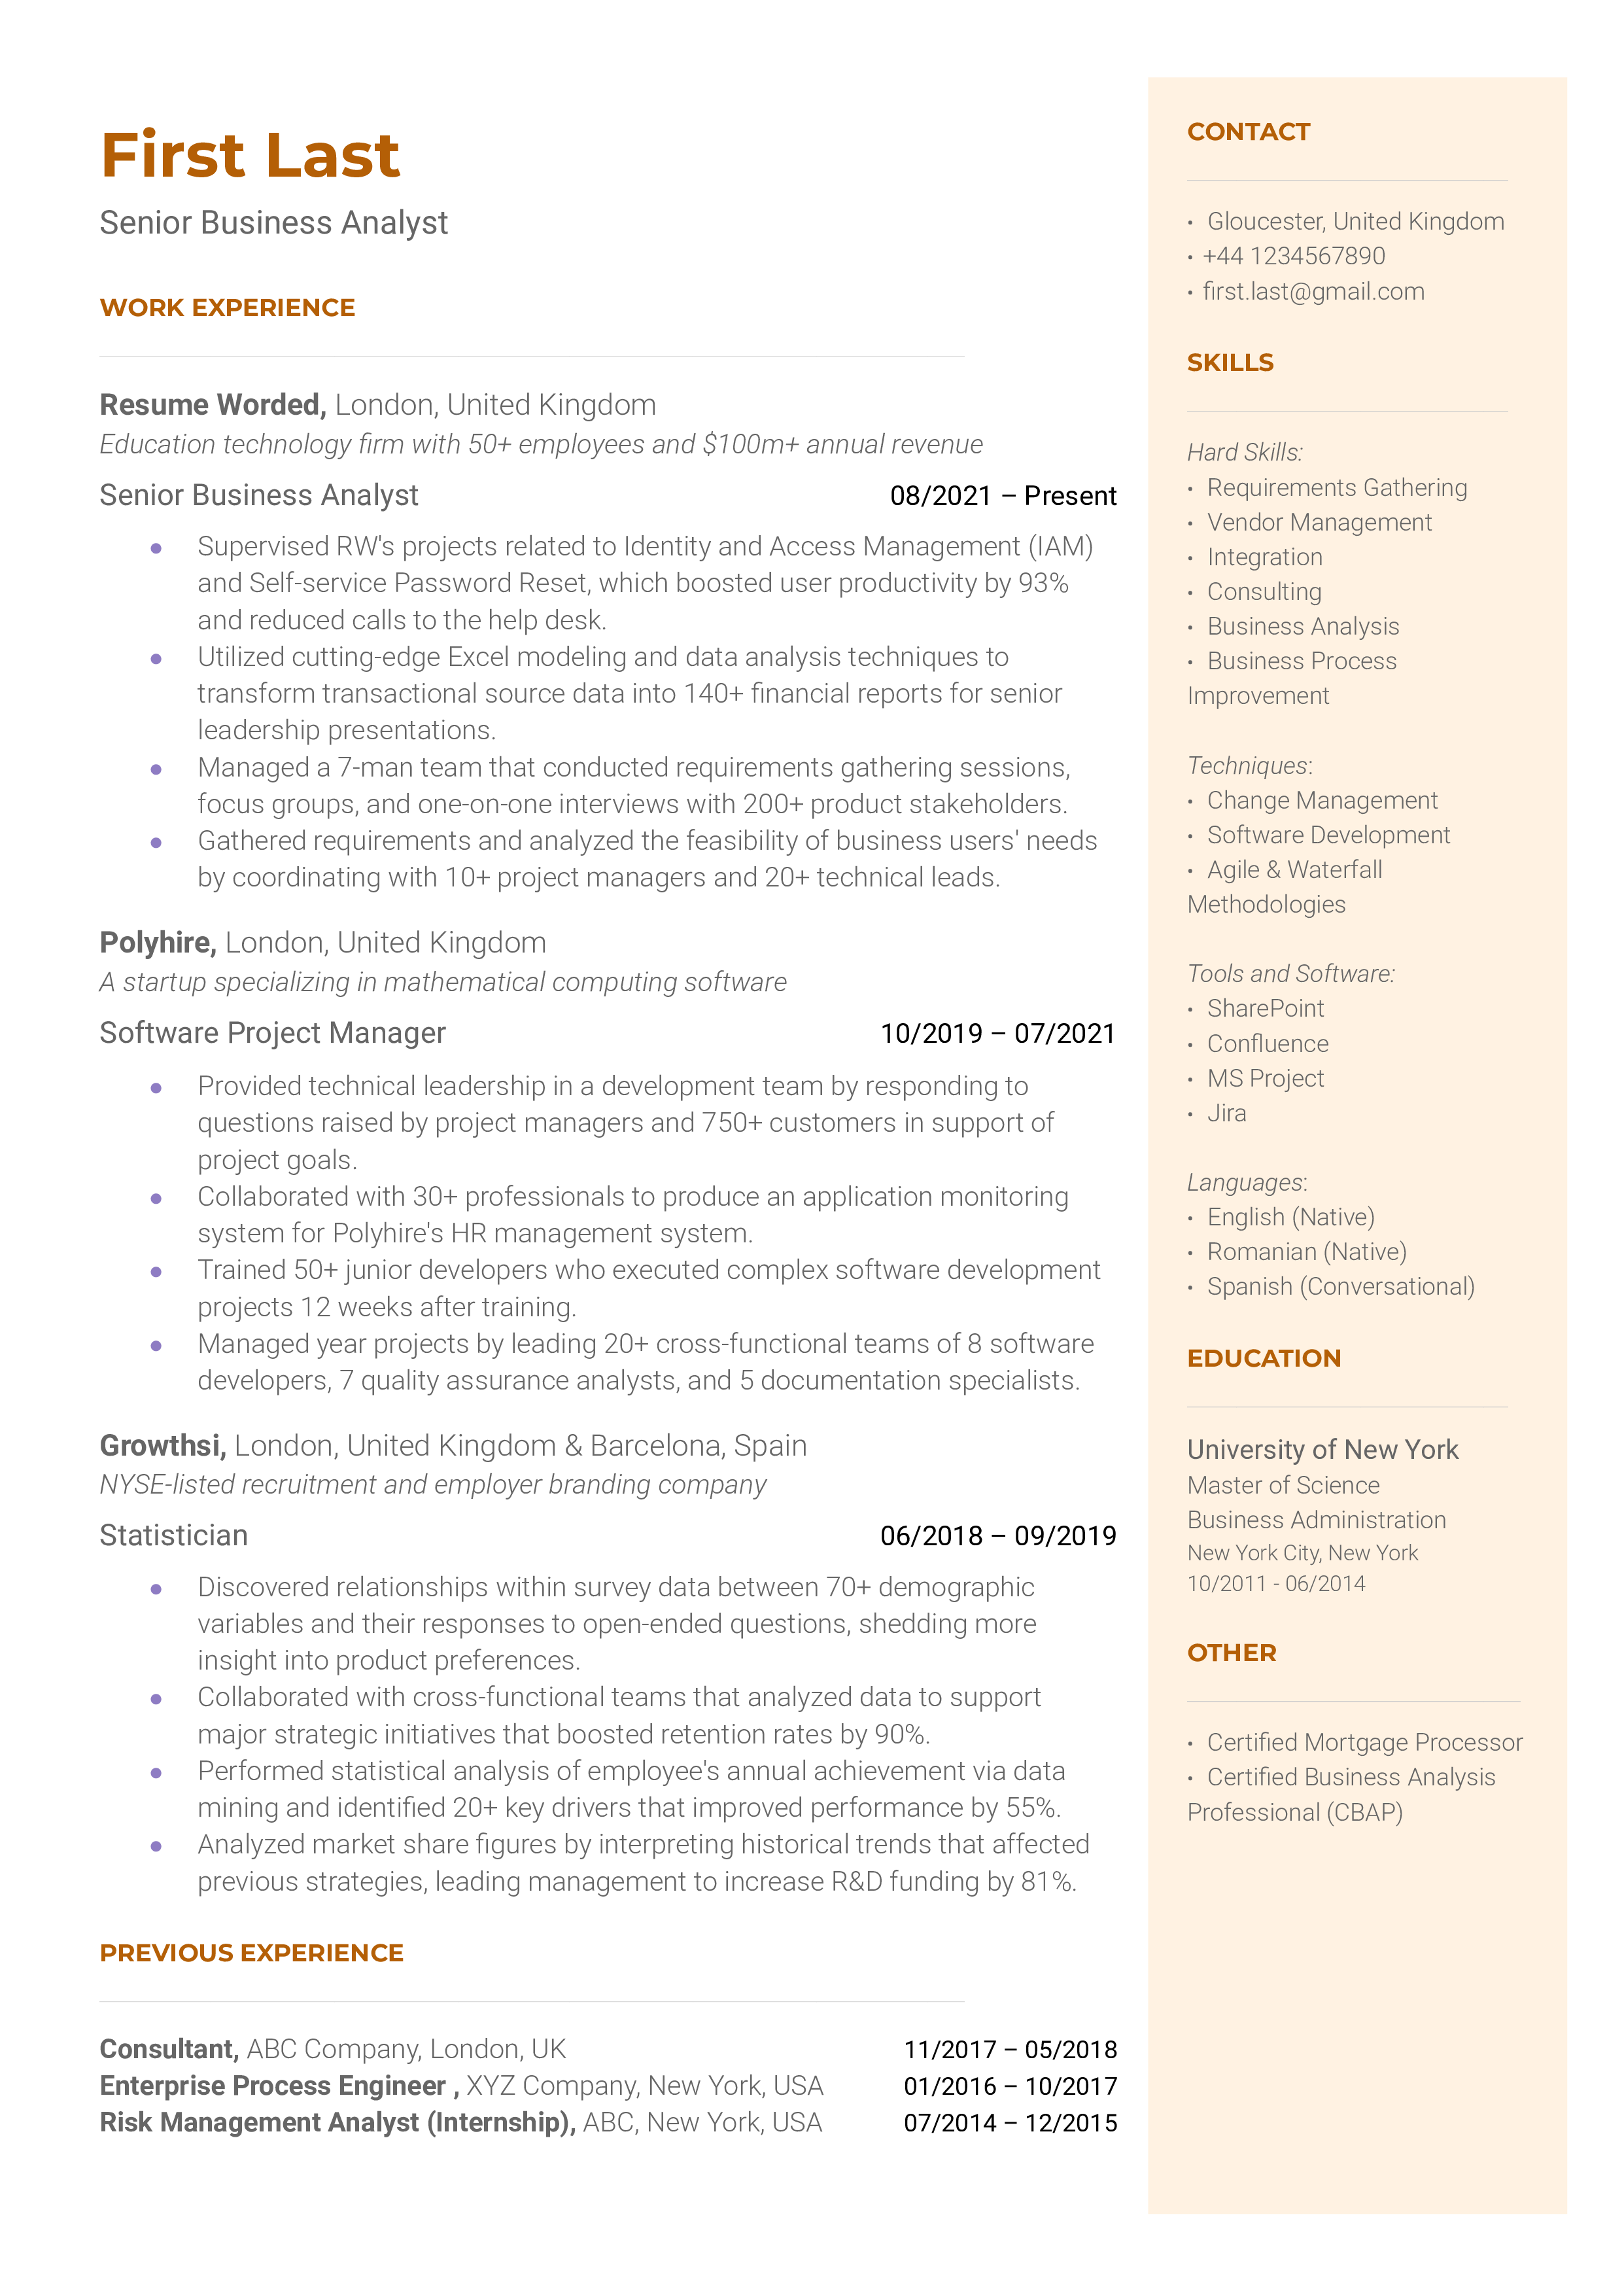 A senior business analyst resume template including relevant knowledge of tools and software